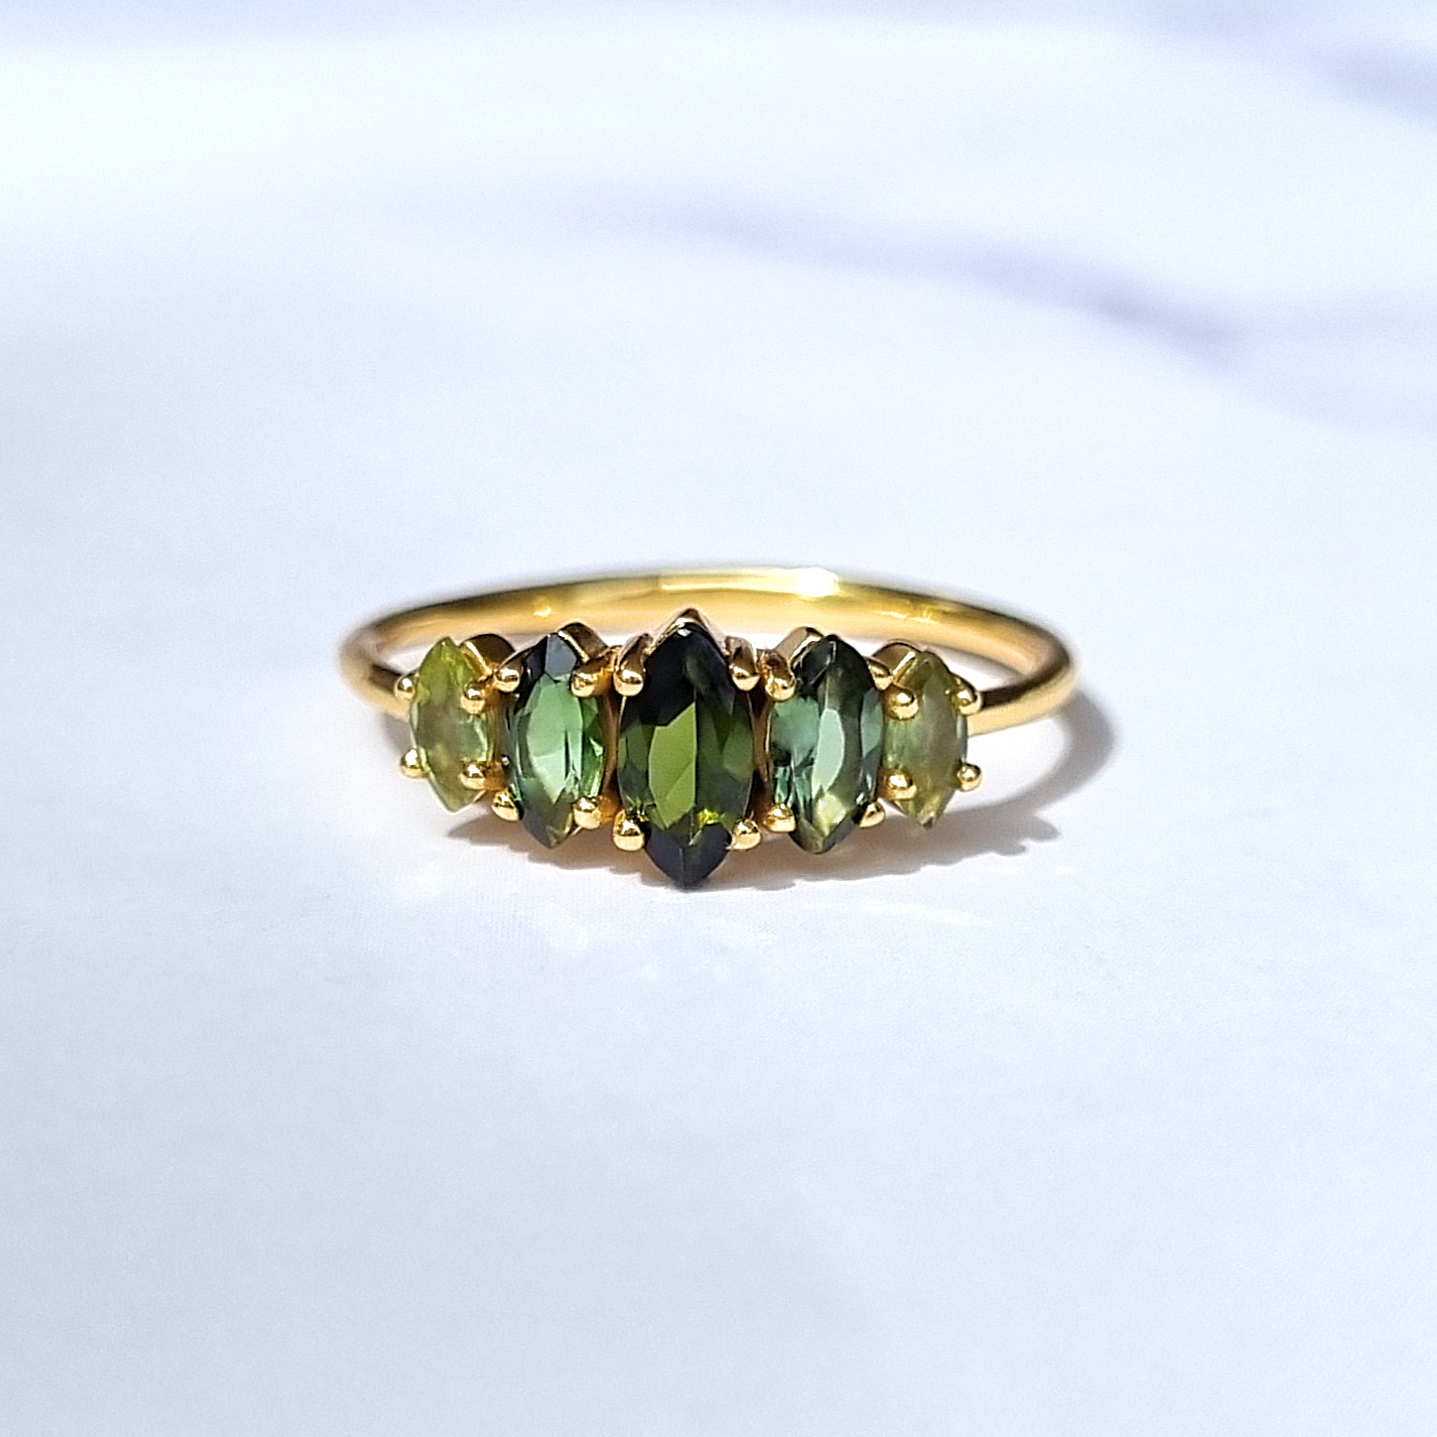  Oval cut Ombre green wedding, engagement and promise ring in 18k gold vermeil.